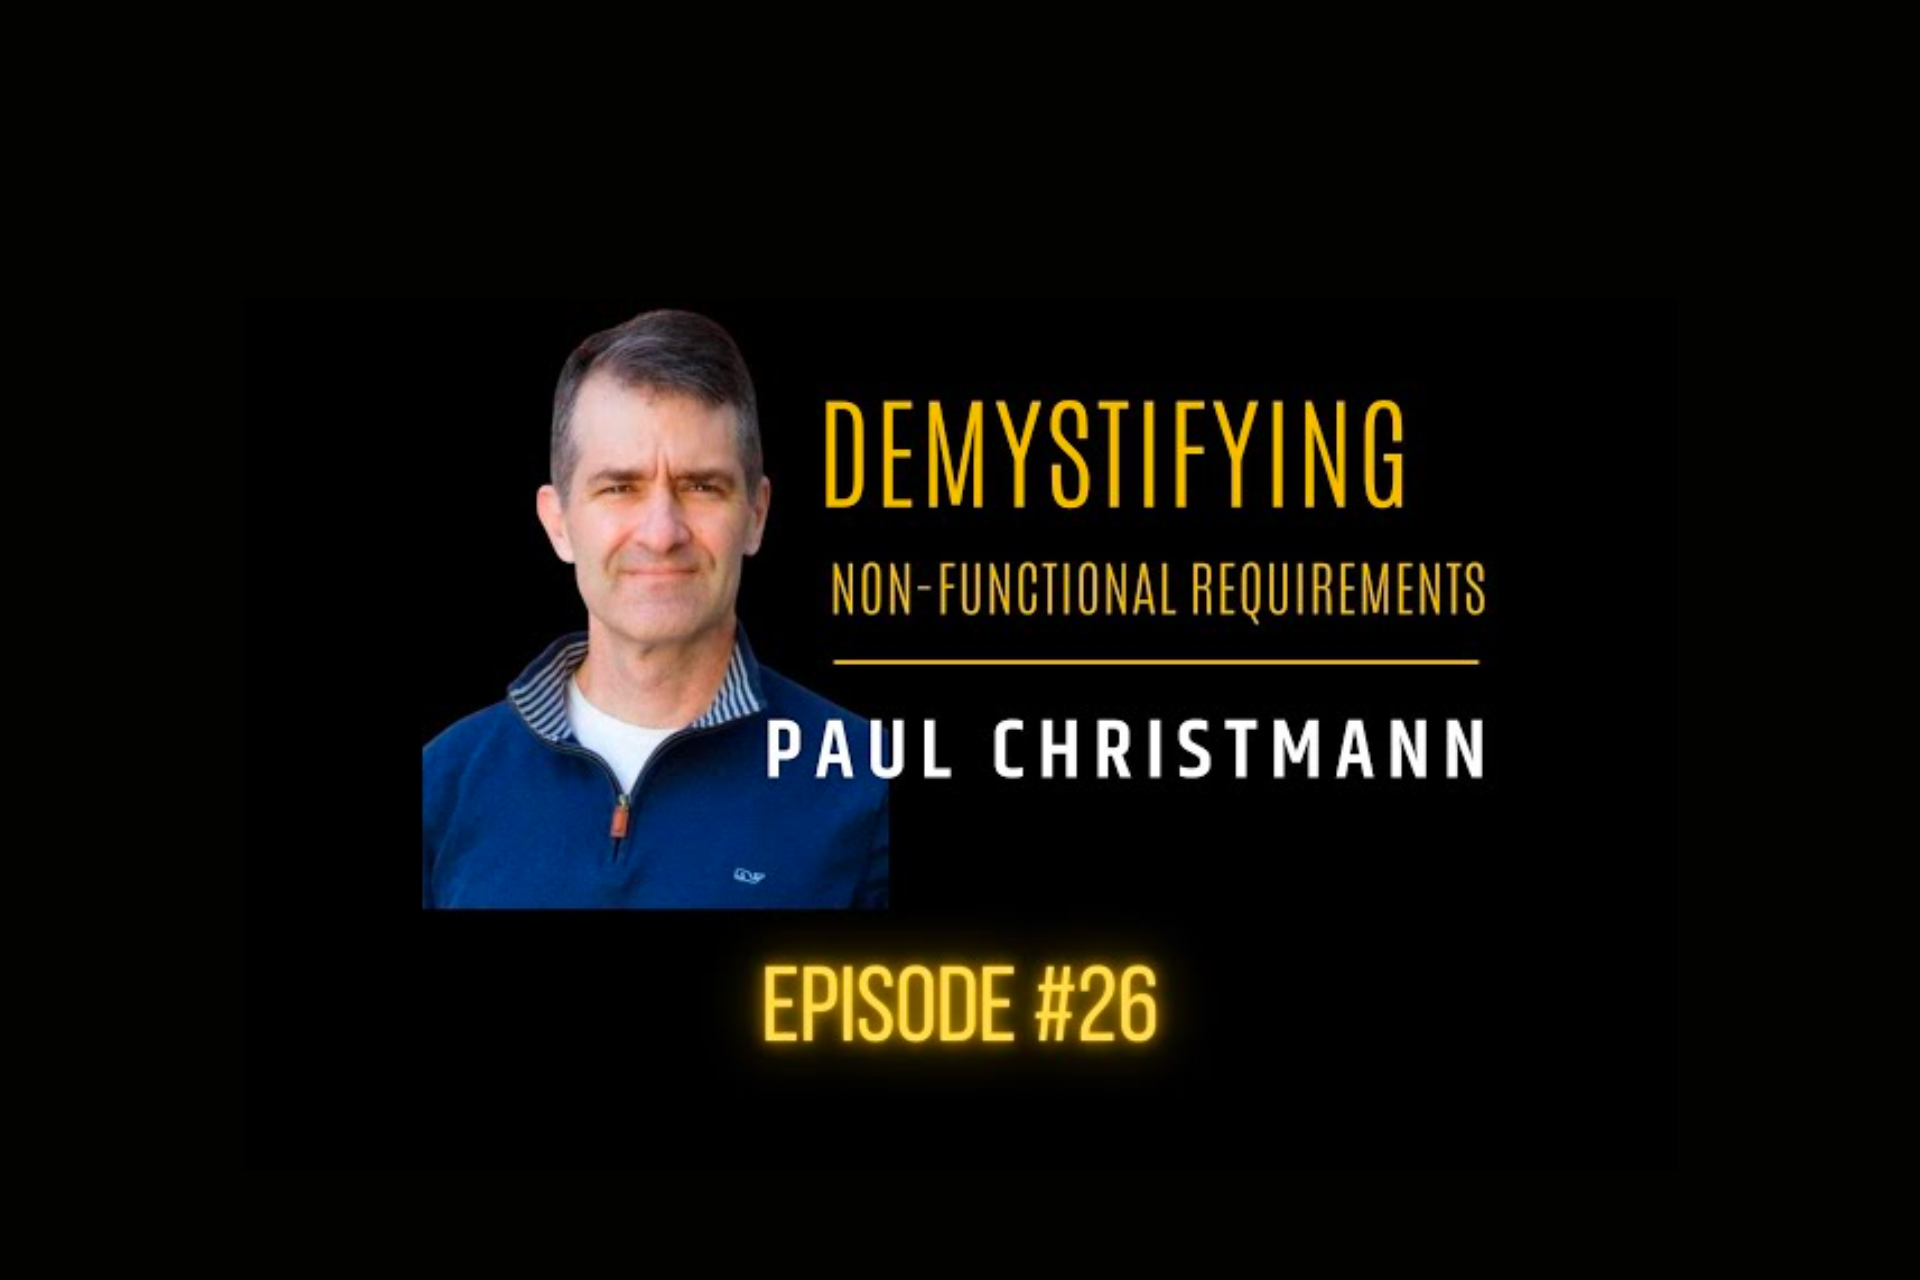 Demystifying Non-Functional Requirements with Paul Christmann